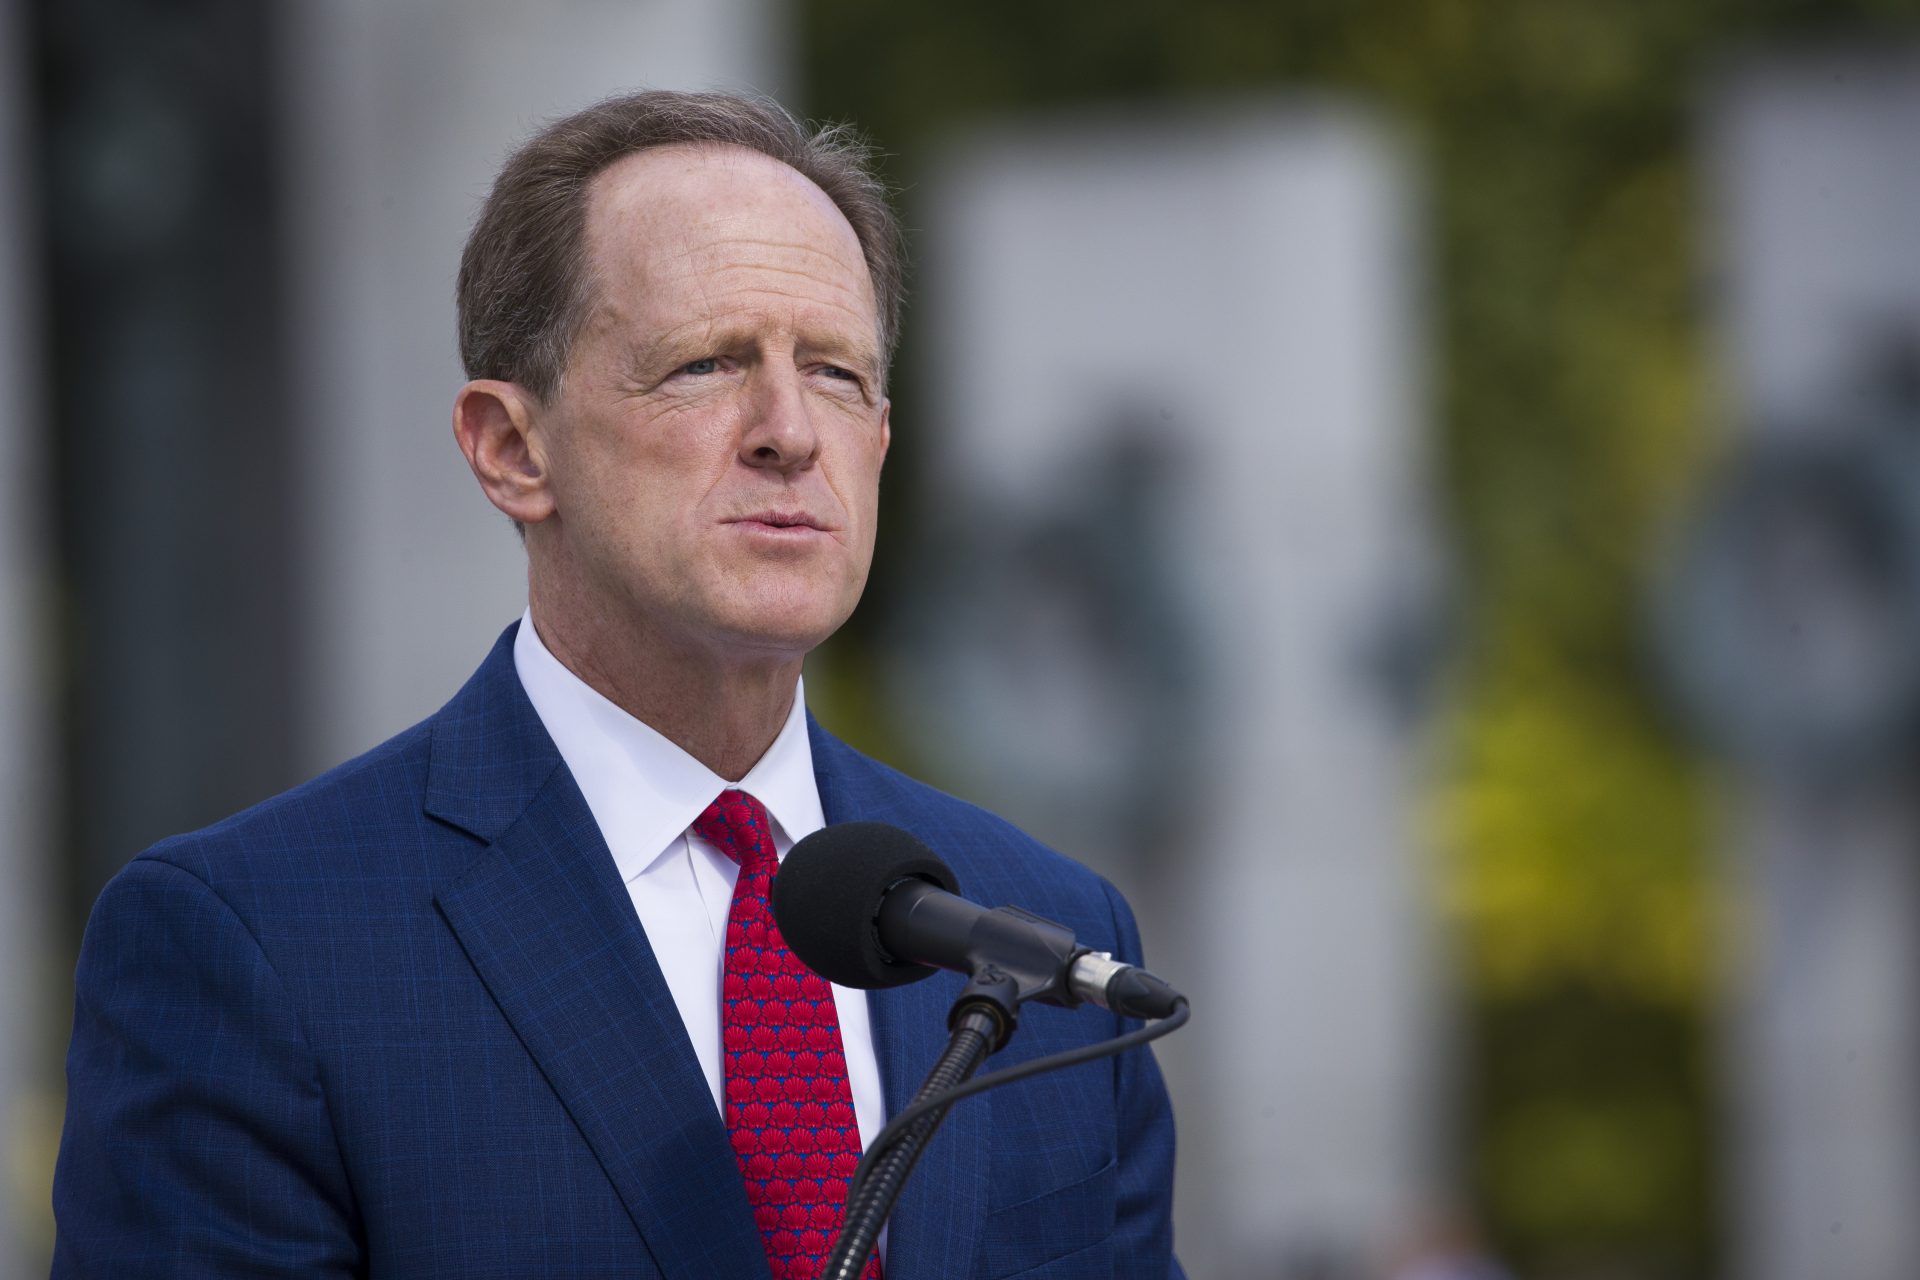 Sen. Pat Toomey, R-Pa., speaks during a ceremony Wednesday, Sept. 18, 2019, in Washington. Toomey will not seek re-election in 2022, according to a person with direct knowledge of Toomey's plans, Sunday, Oct. 4, 2020.